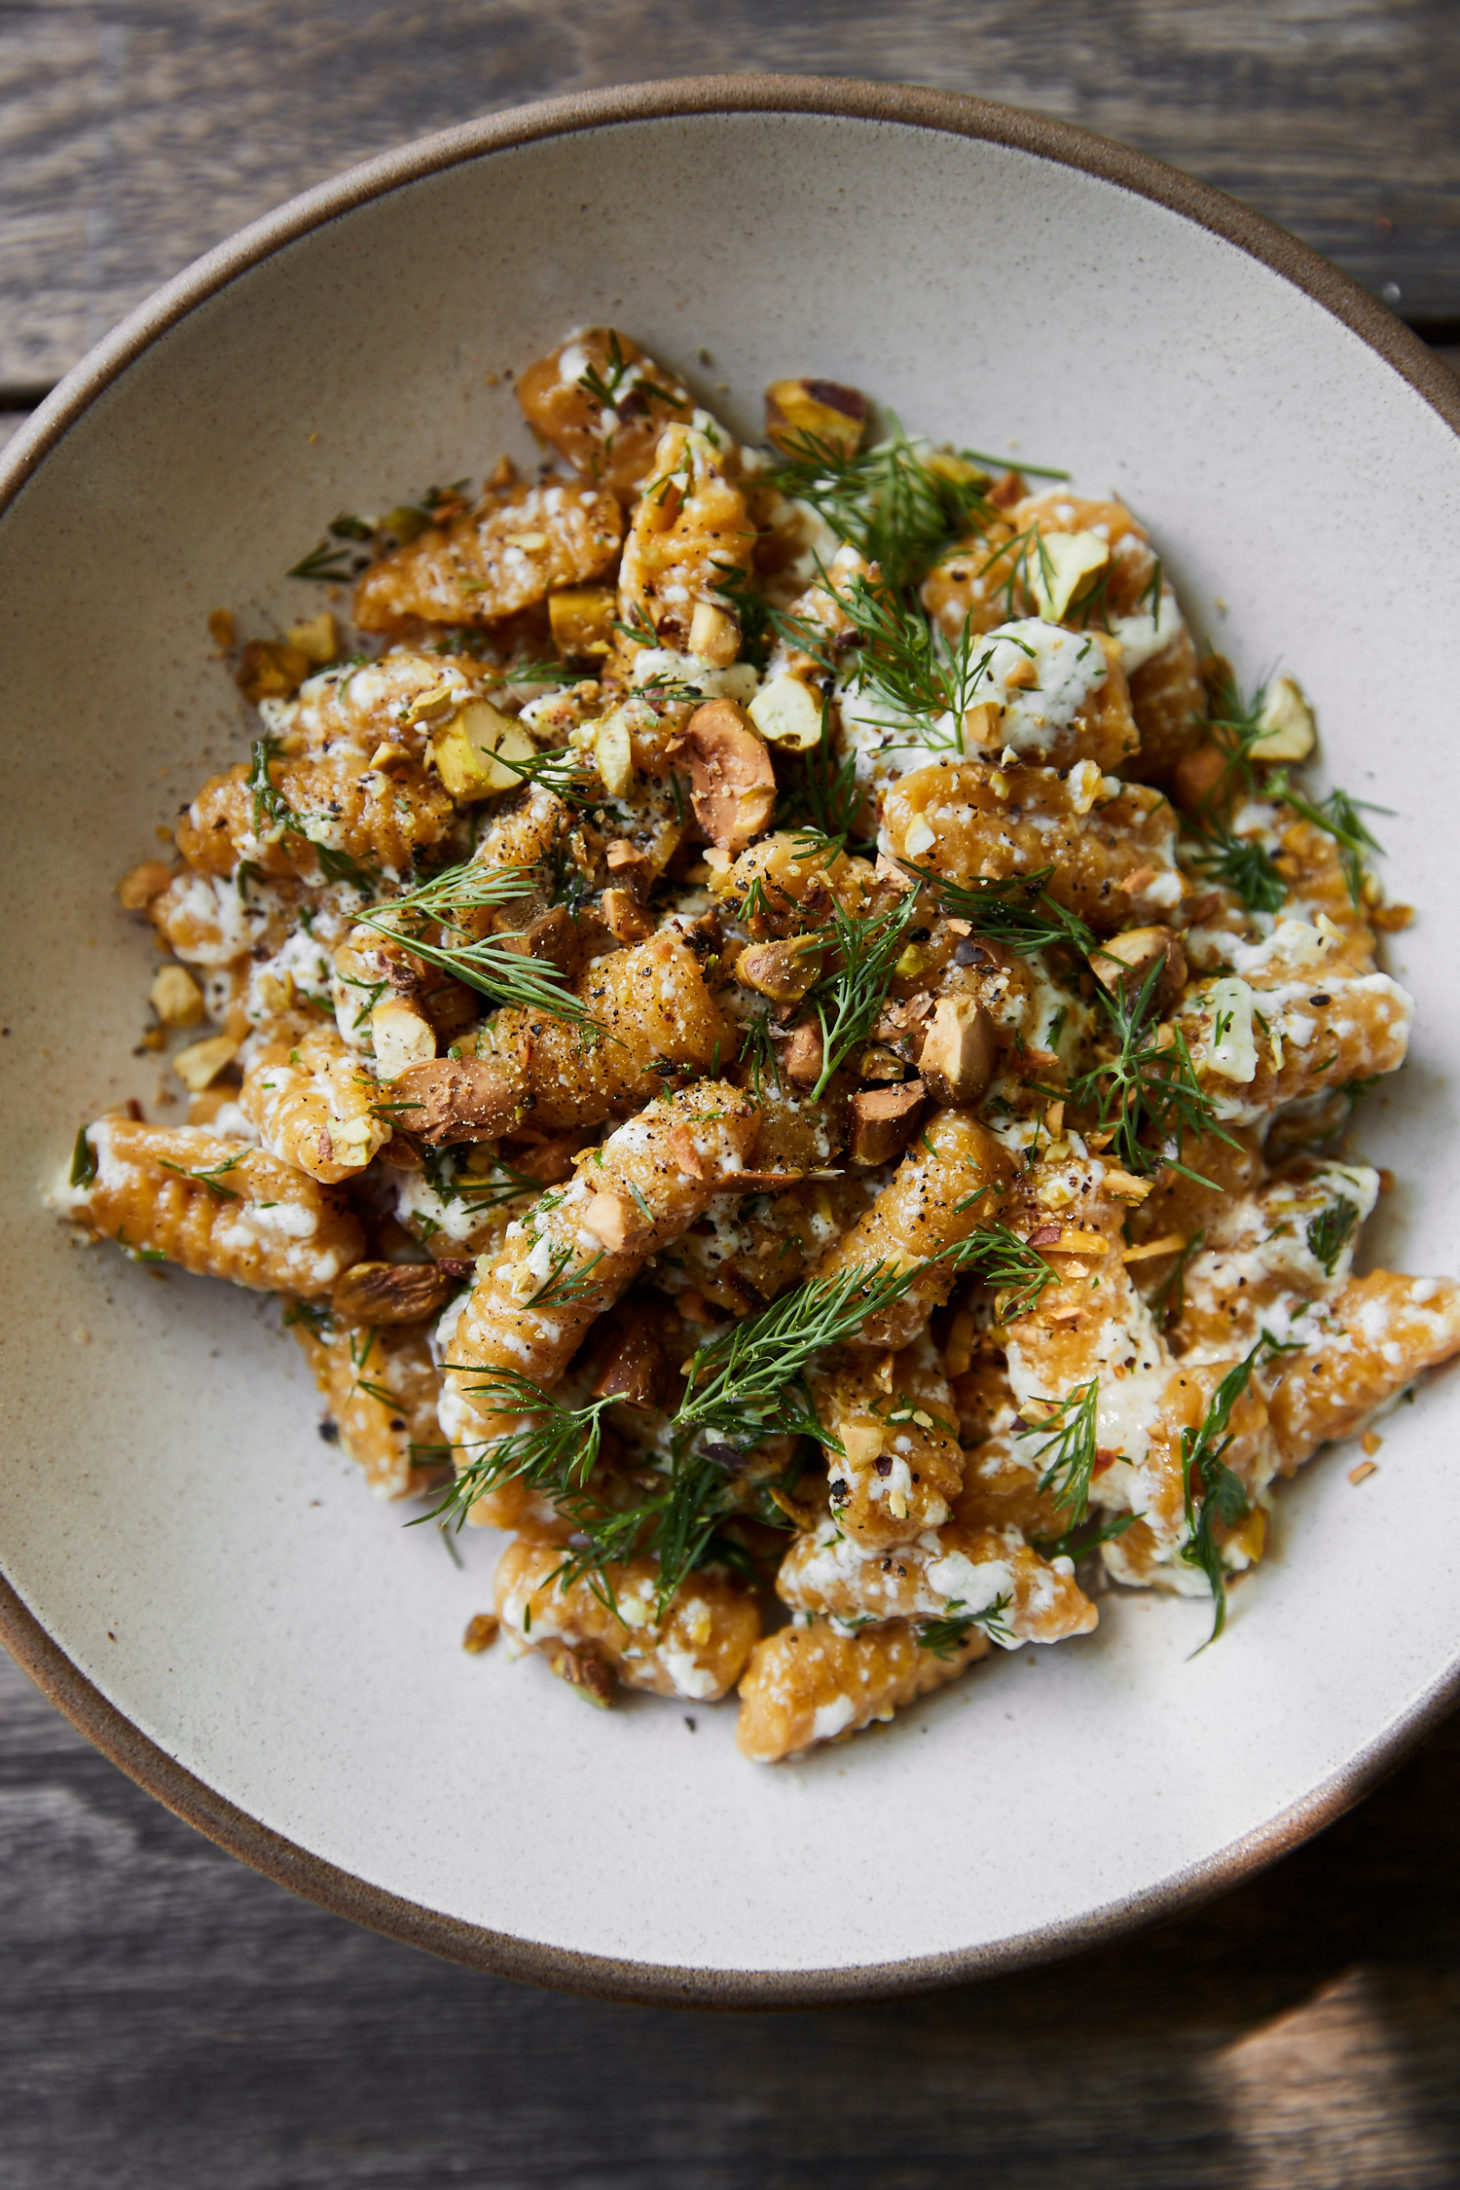 Carrot Cavatelli with Dill and Ricotta